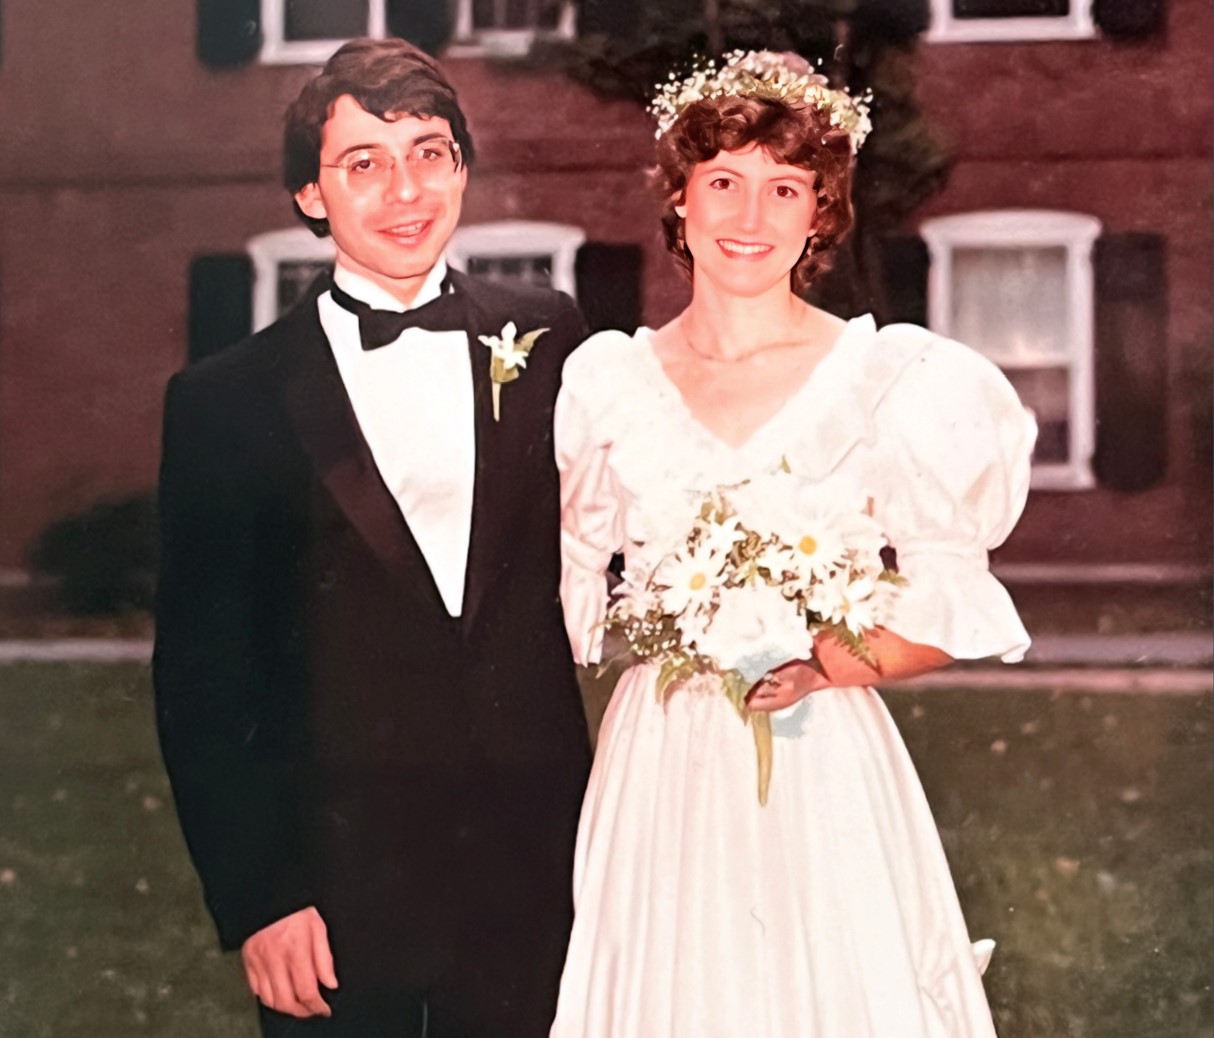 Dr. Winer and his wife, Nancy, on their wedding day.